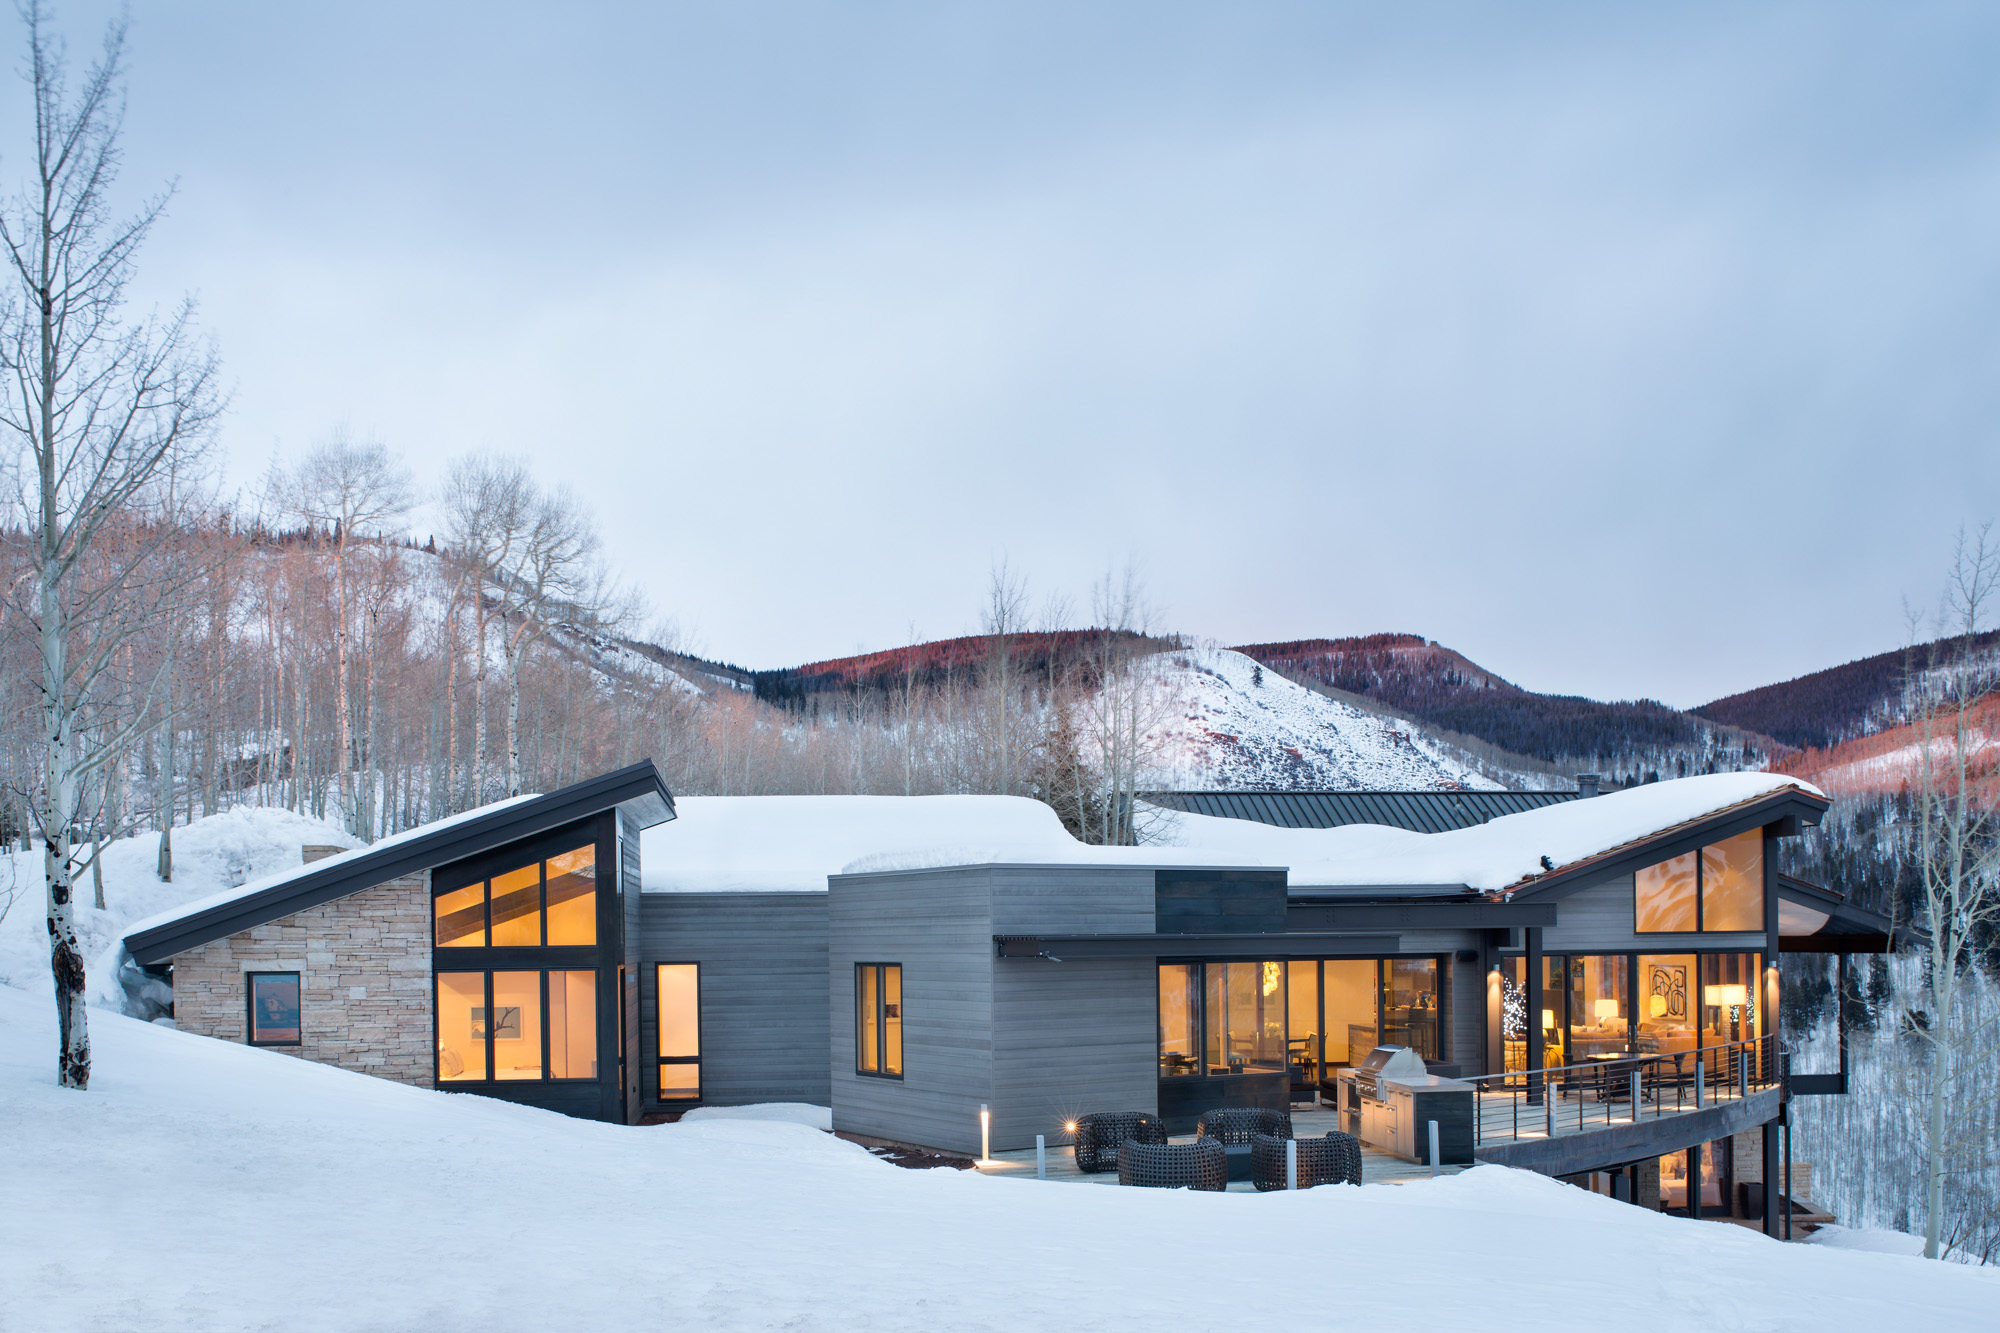 mountain star modern exterior photo of a grey modern home in the snow at dusk an example of mountain modern style